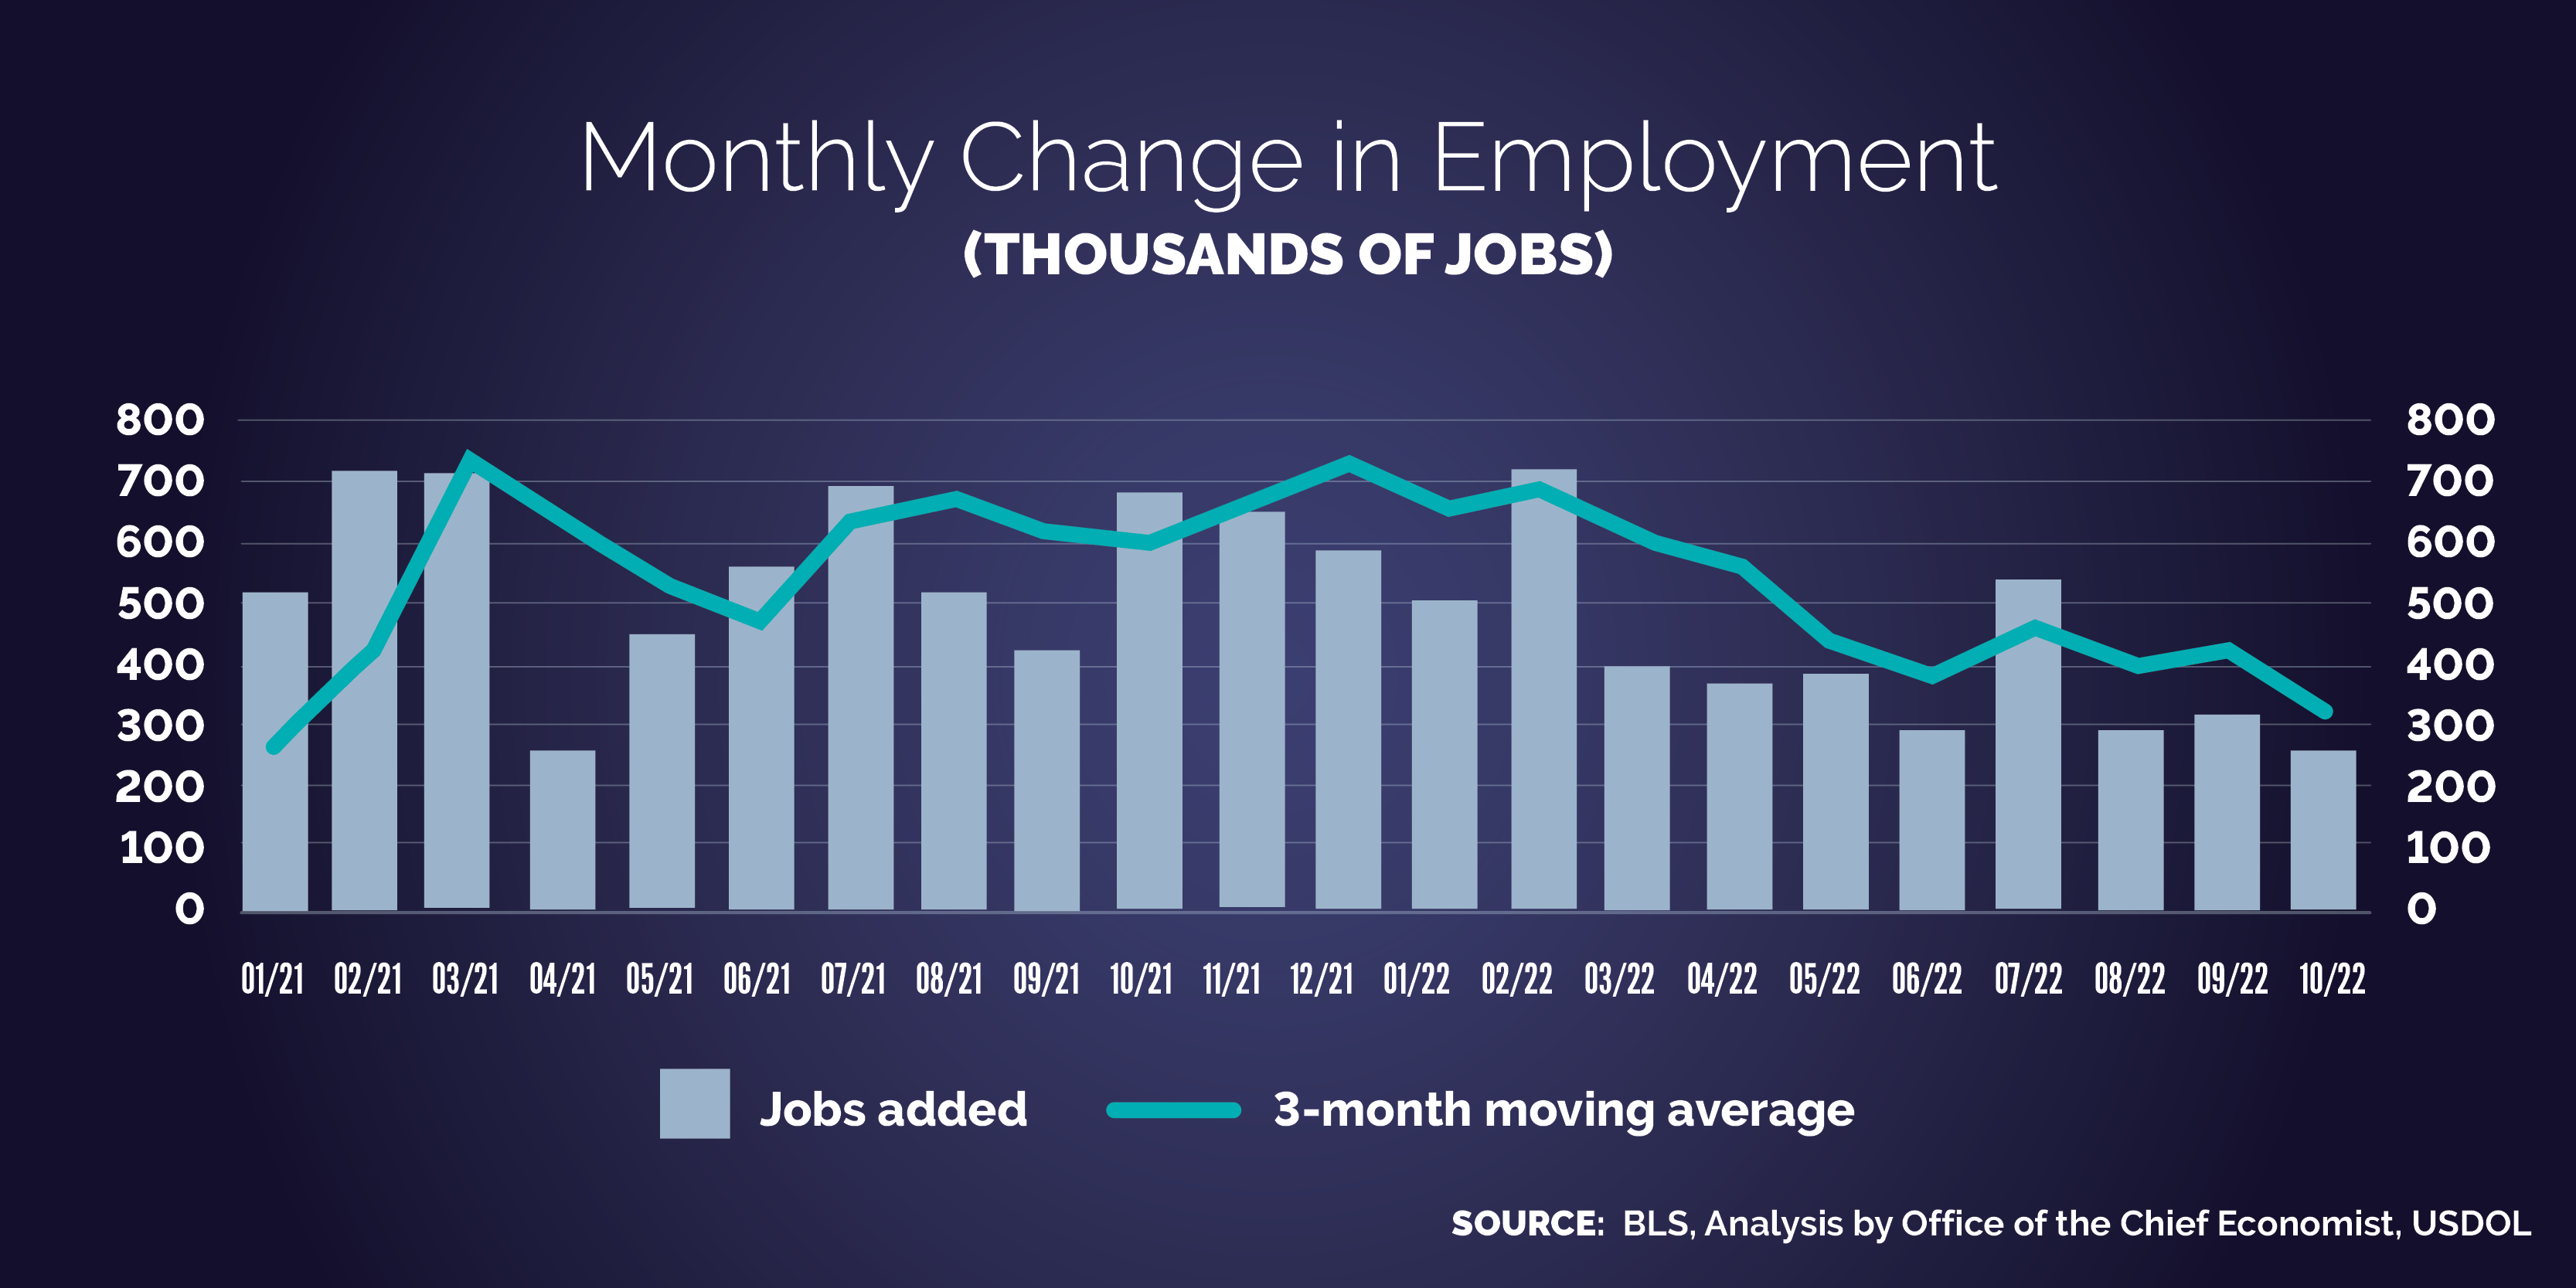 Monthly change in employment (by thousands) from January 2021 to October 2022 with the 3-month moving average. The past few months have seen steady but lower growth.